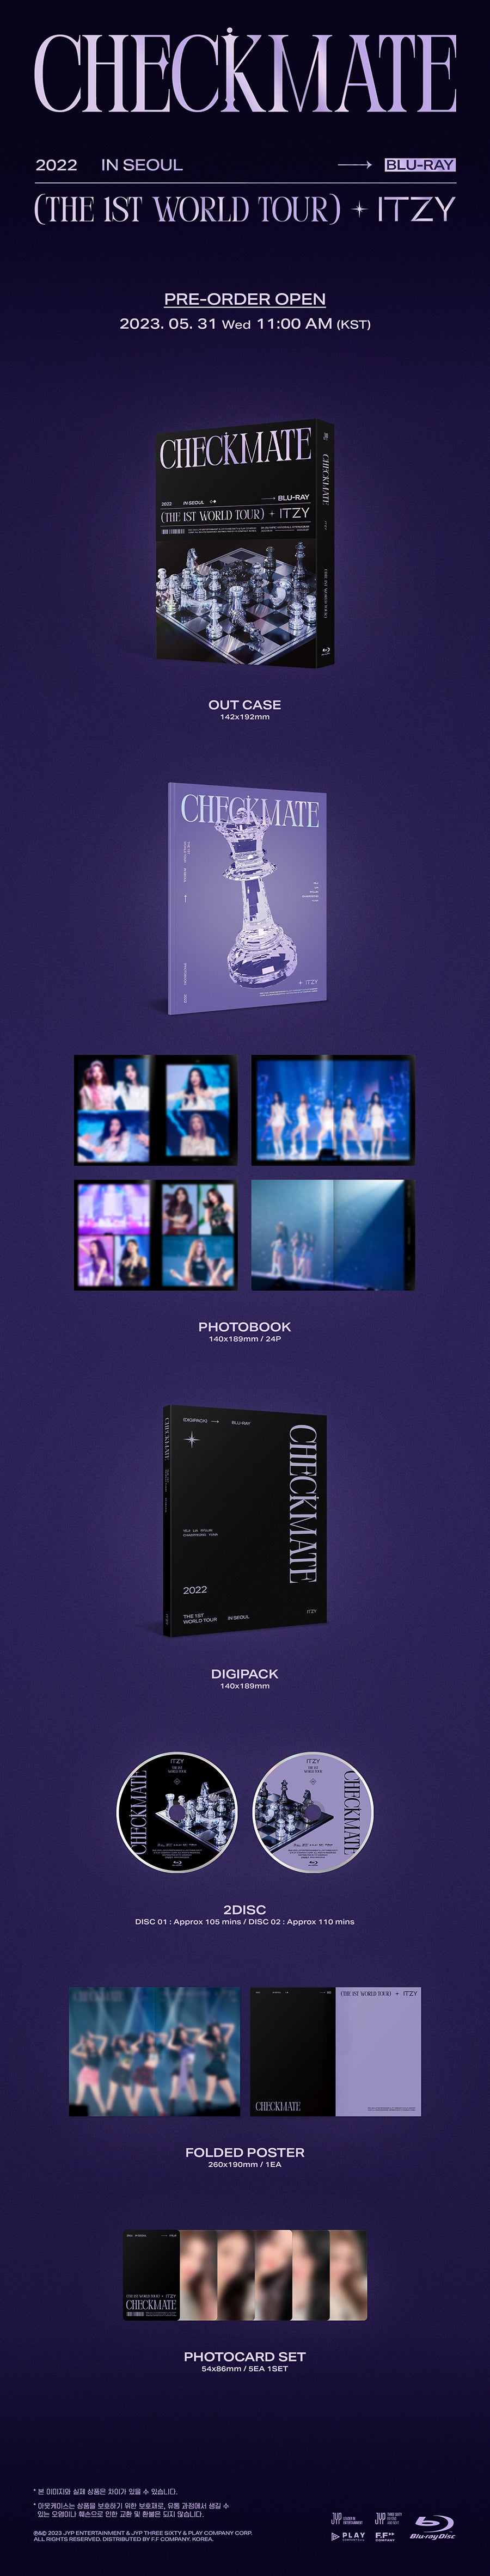 ITZY 2022 THE 1ST WORLD TOUR IN SEOUL 'CHECKMATE' (BLU-RAY) DETAIL